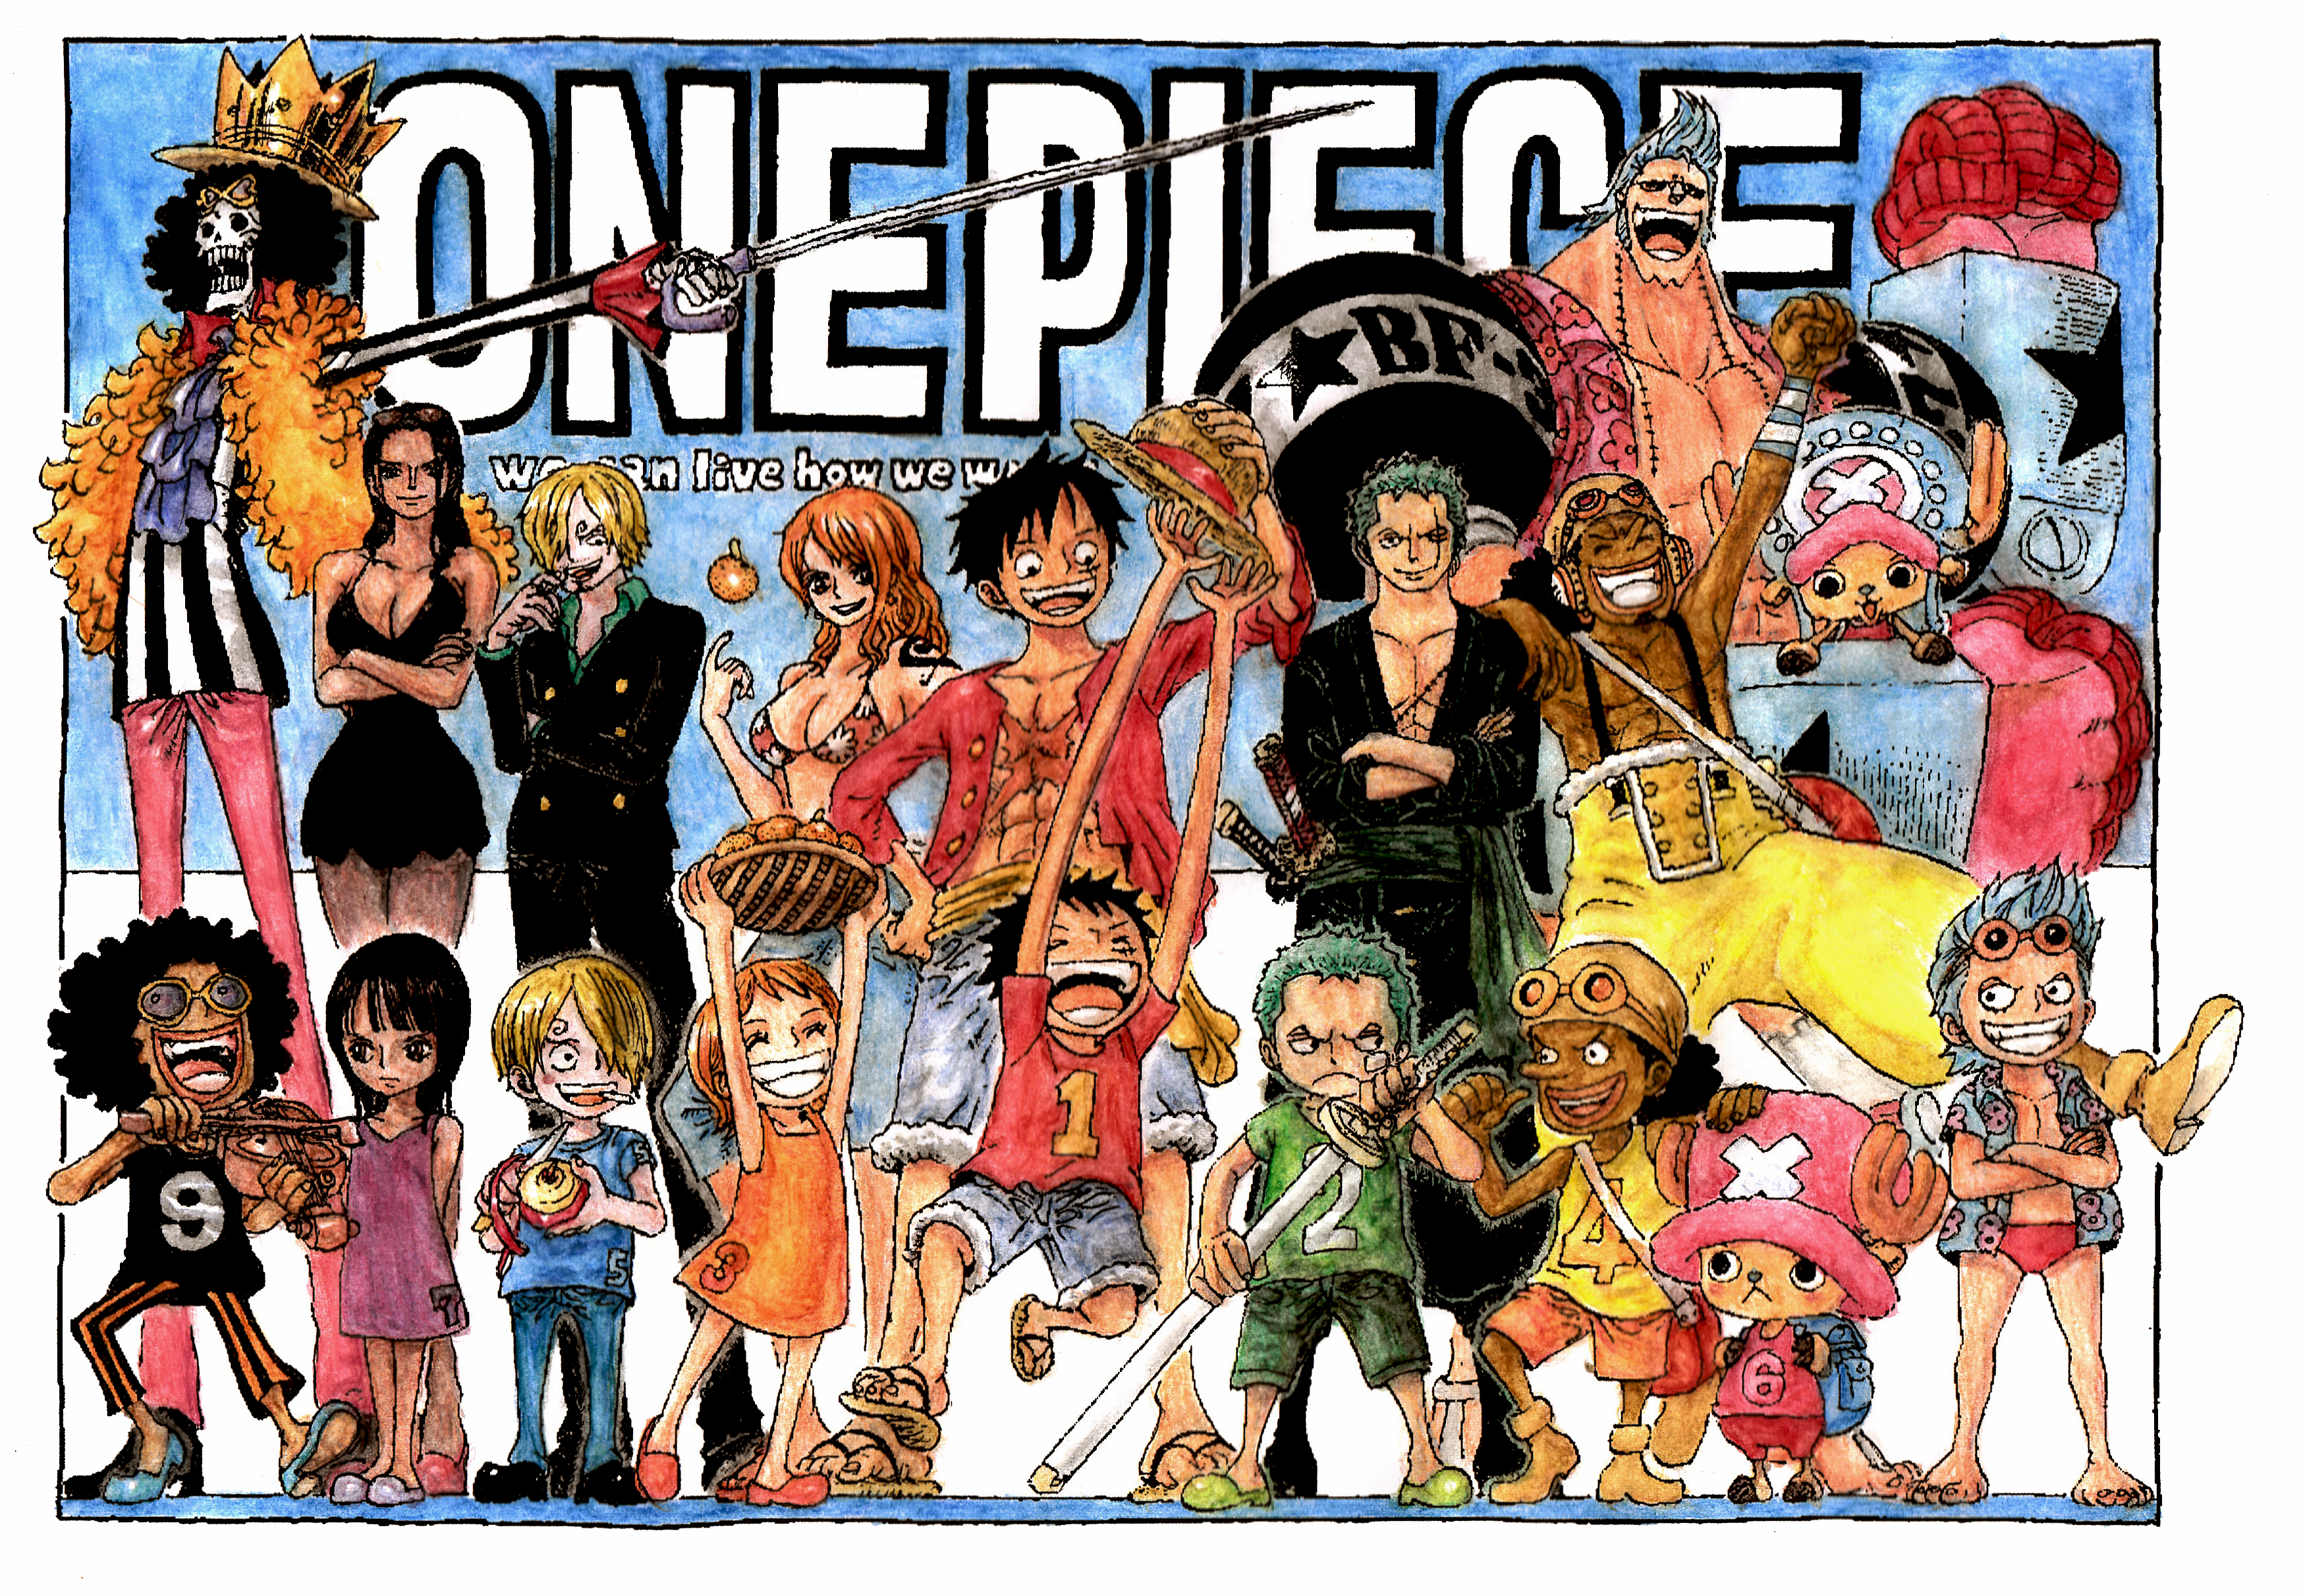 We Can!, One Piece Wiki